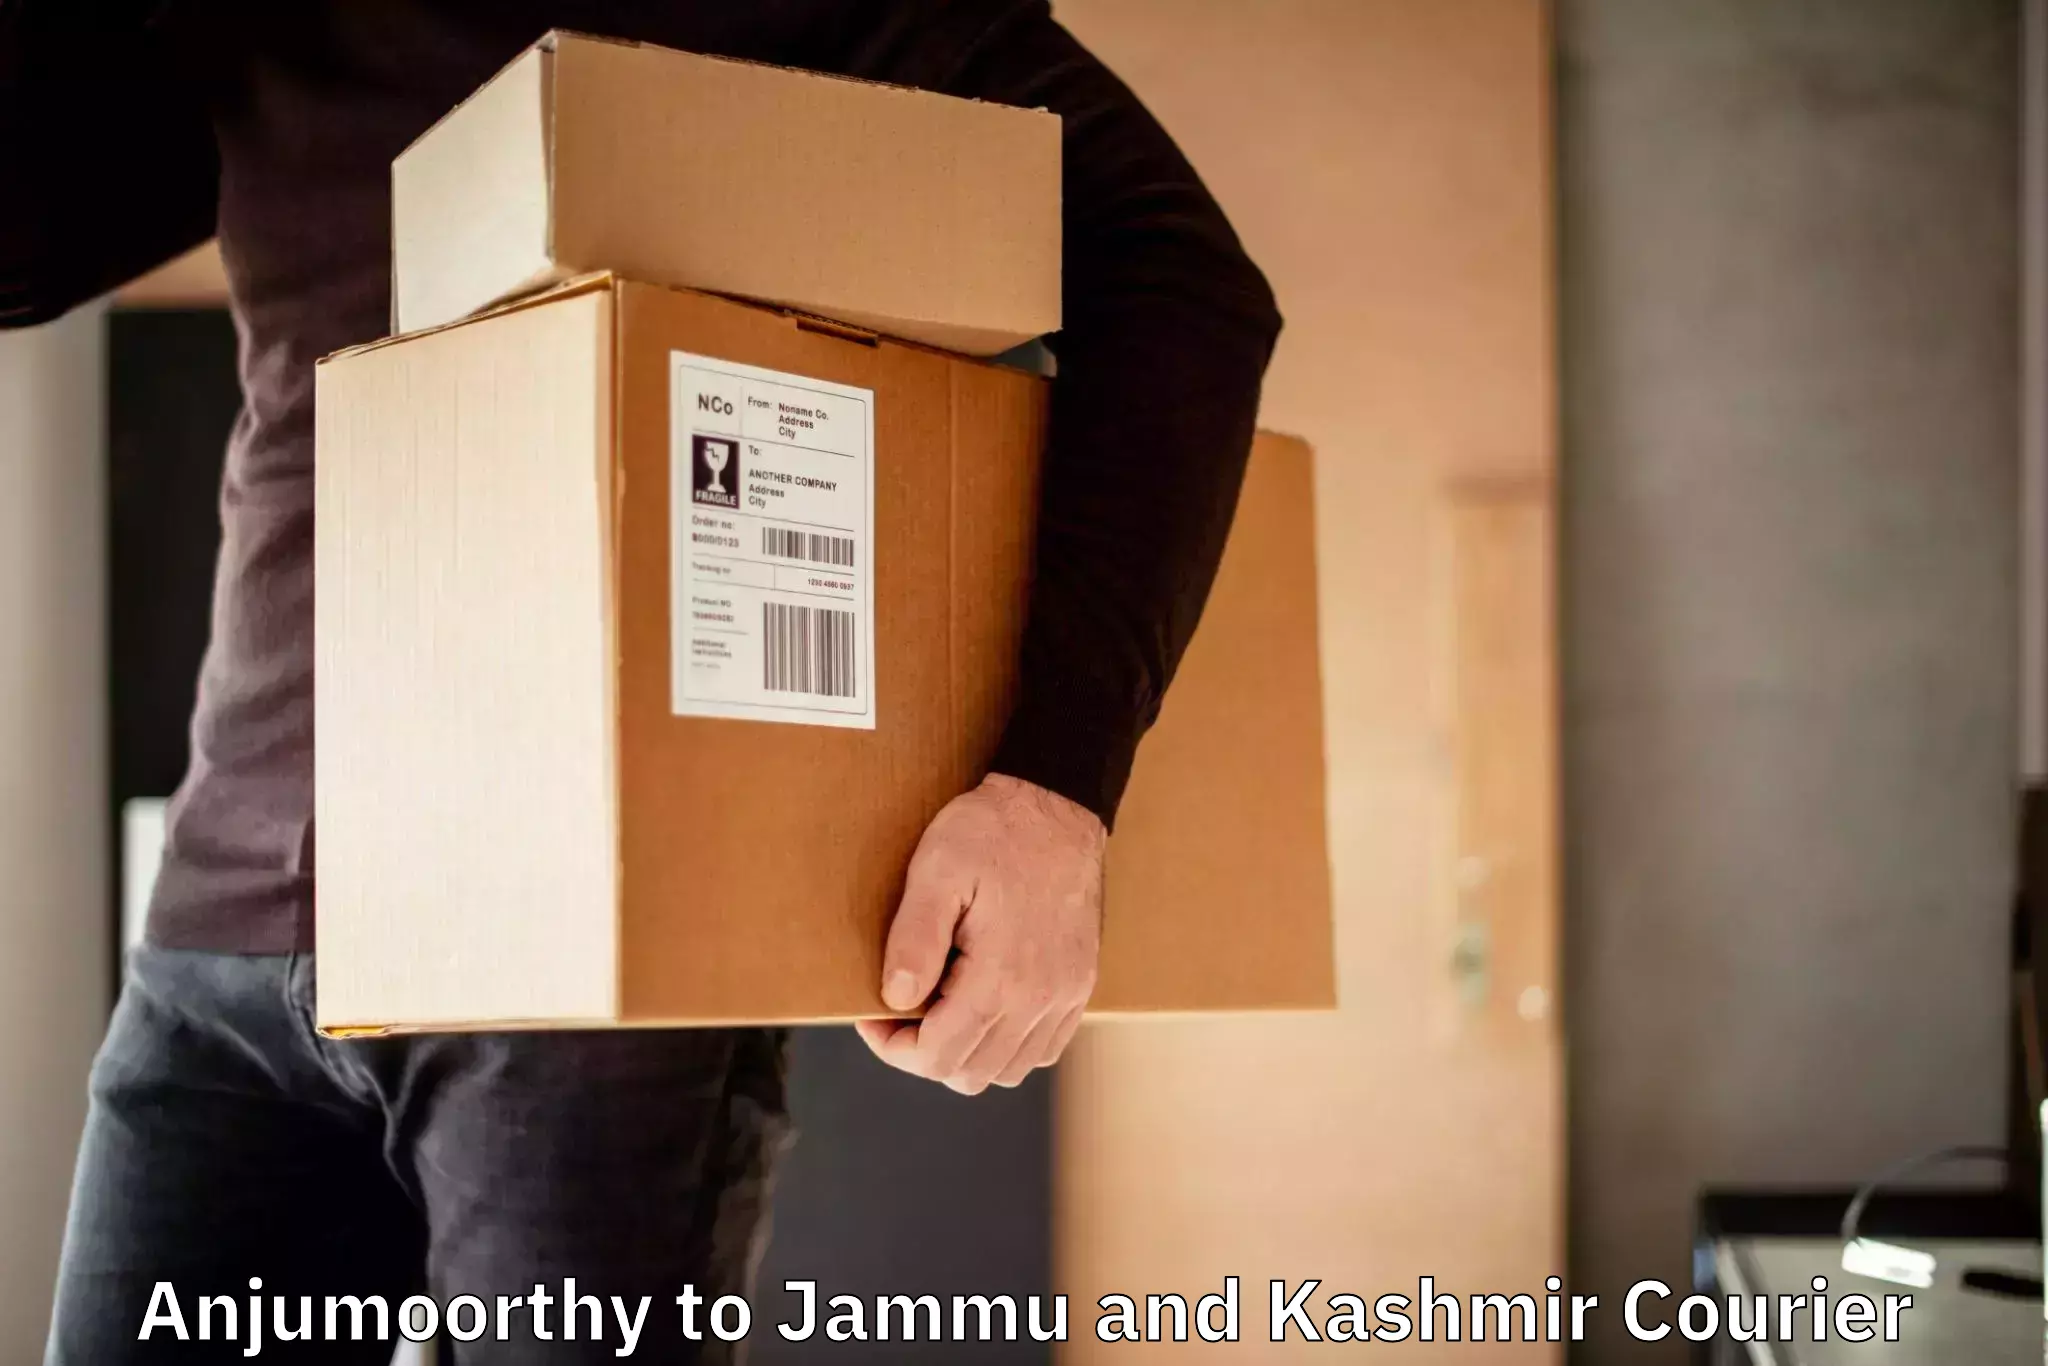 Global parcel delivery Anjumoorthy to Sopore